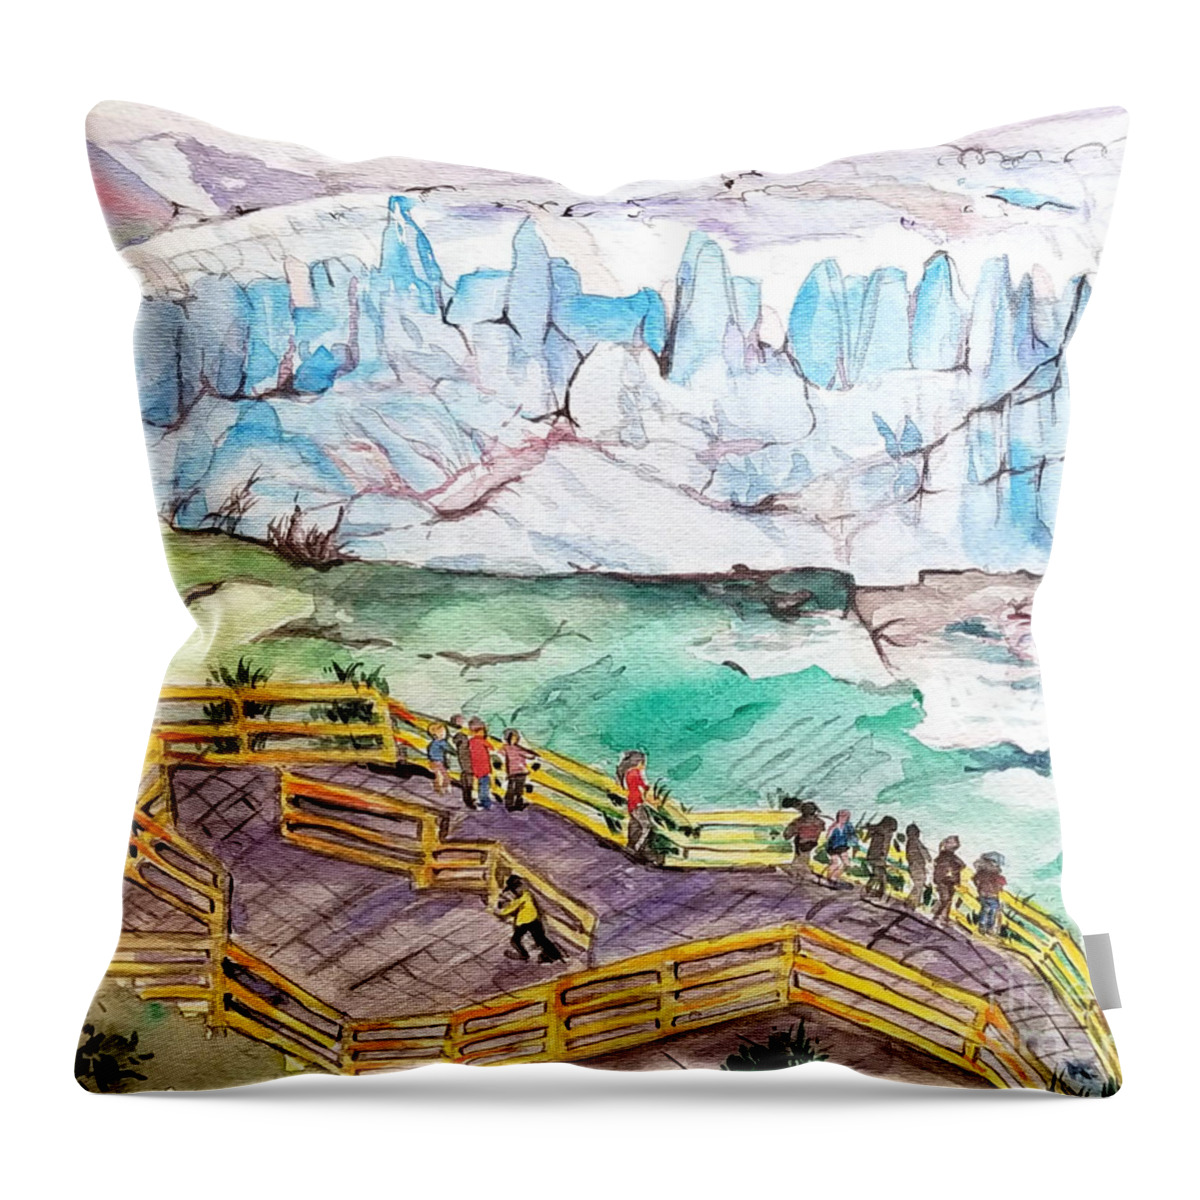 Watercolor Brush Painting Glaciers Icebergs Ocean Brush Painting Throw Pillow featuring the painting Glaciers by Leslie Ouyang